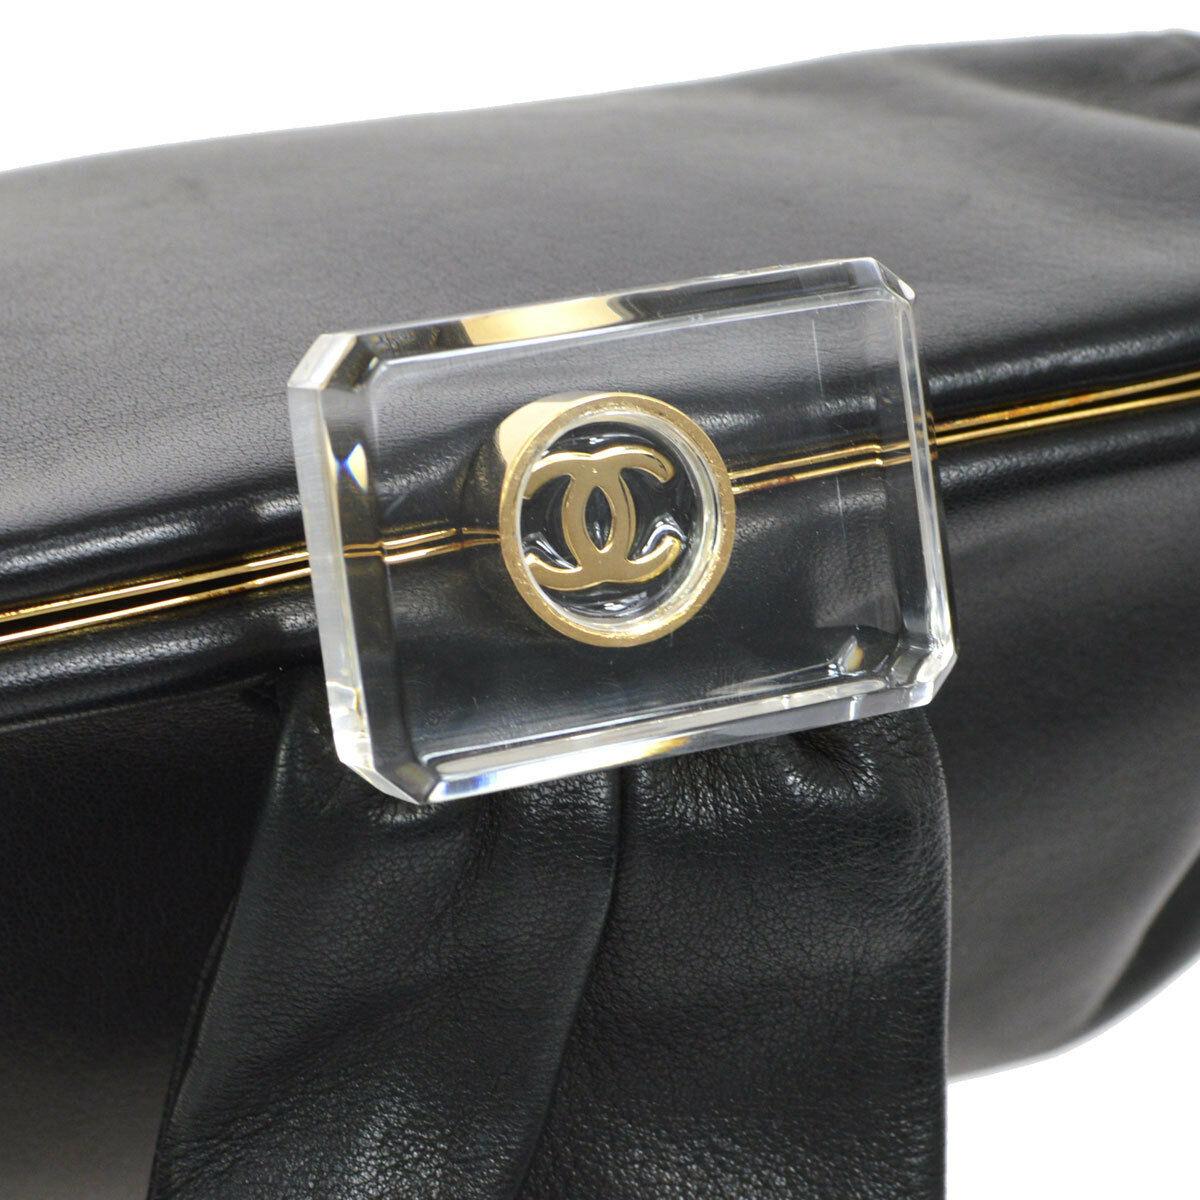 Chanel Black Leather Gold Acrylic Top Handle Satchel Wristlet Evening Clutch Bag

Leather
Gold tone hardware
Leather lining
Acrylic
Date code present
Handle drop 6